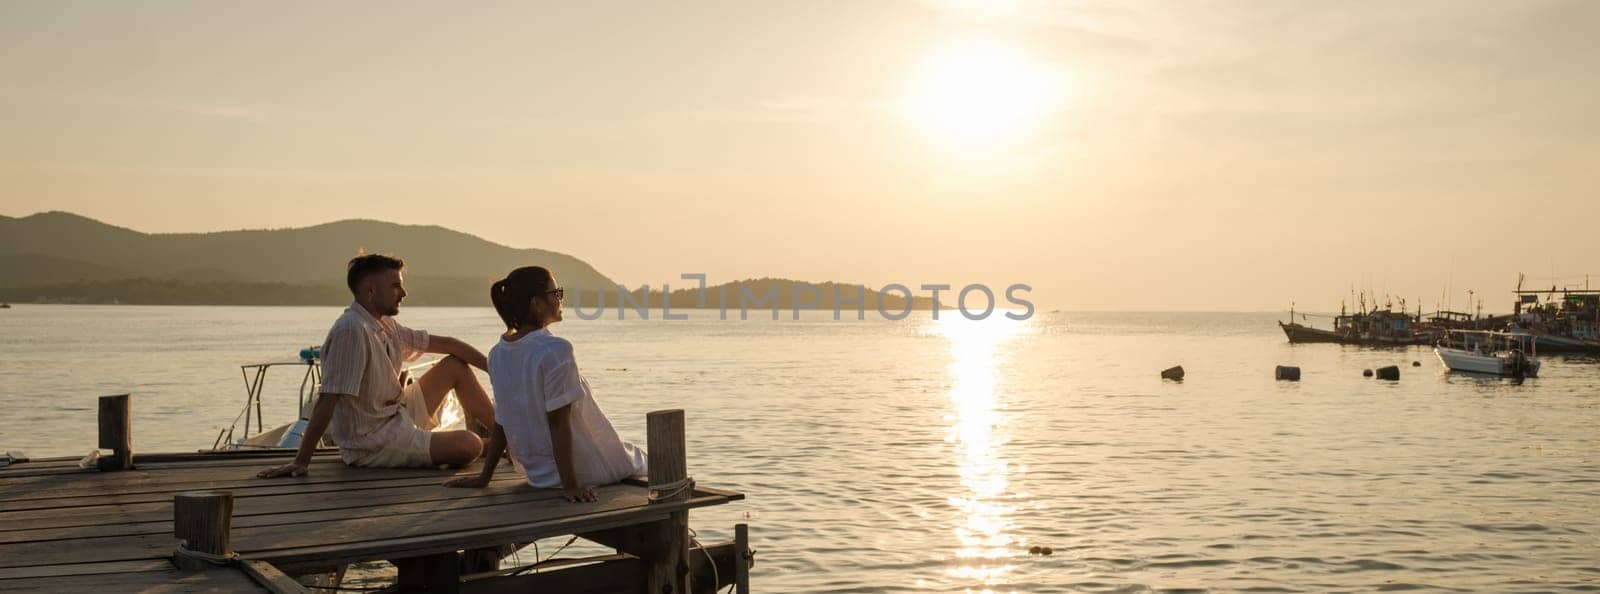 A couple of European men and an Asian woman on vacation in Thailand, couple watching the sunset sitting on a wooden deck pier in the ocean in Samaesan Thailand